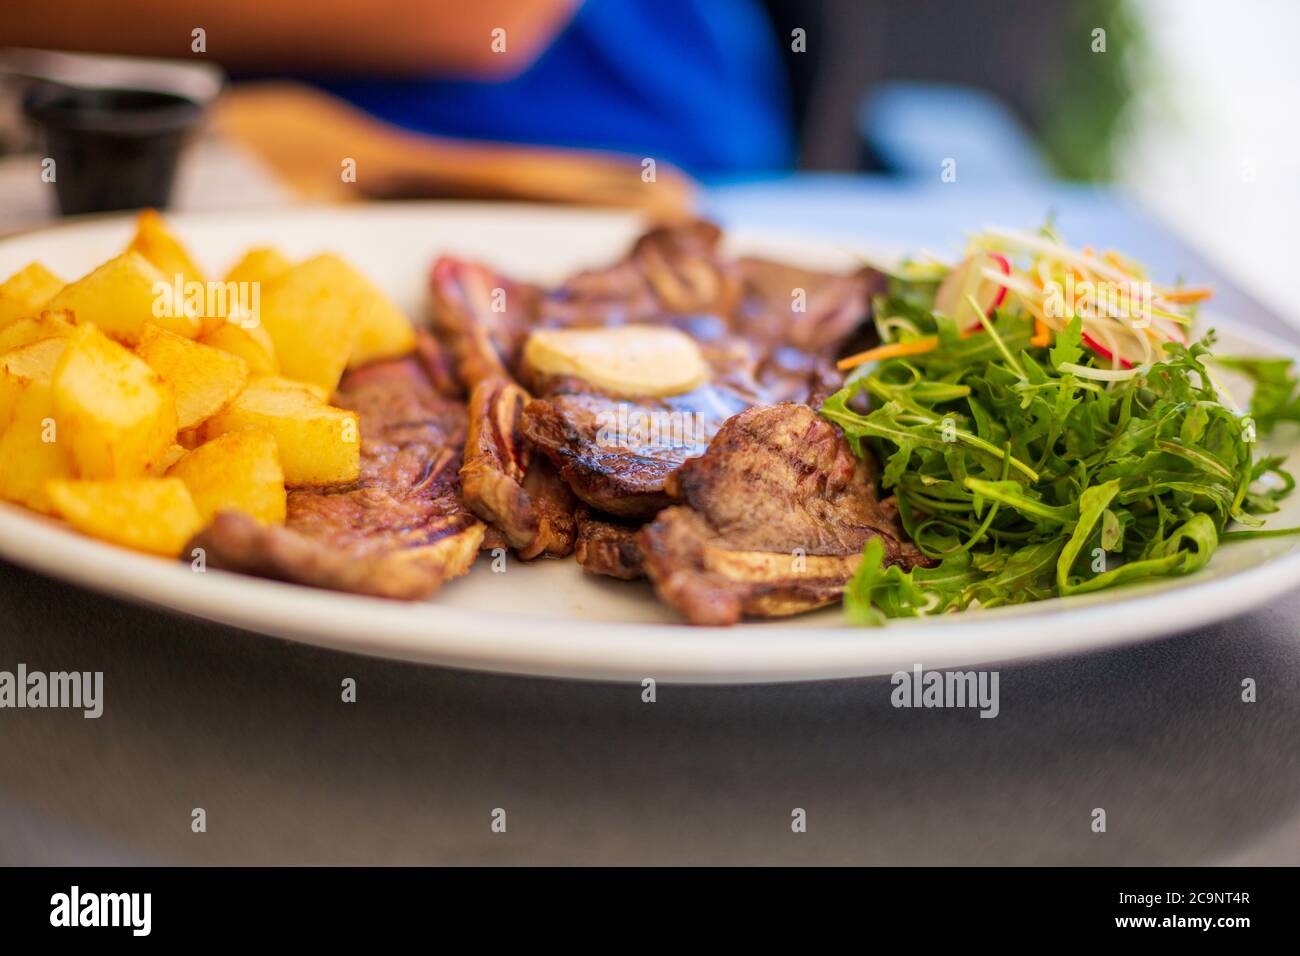 Beef Ribs on plate with potato and vegetables Stock Photo